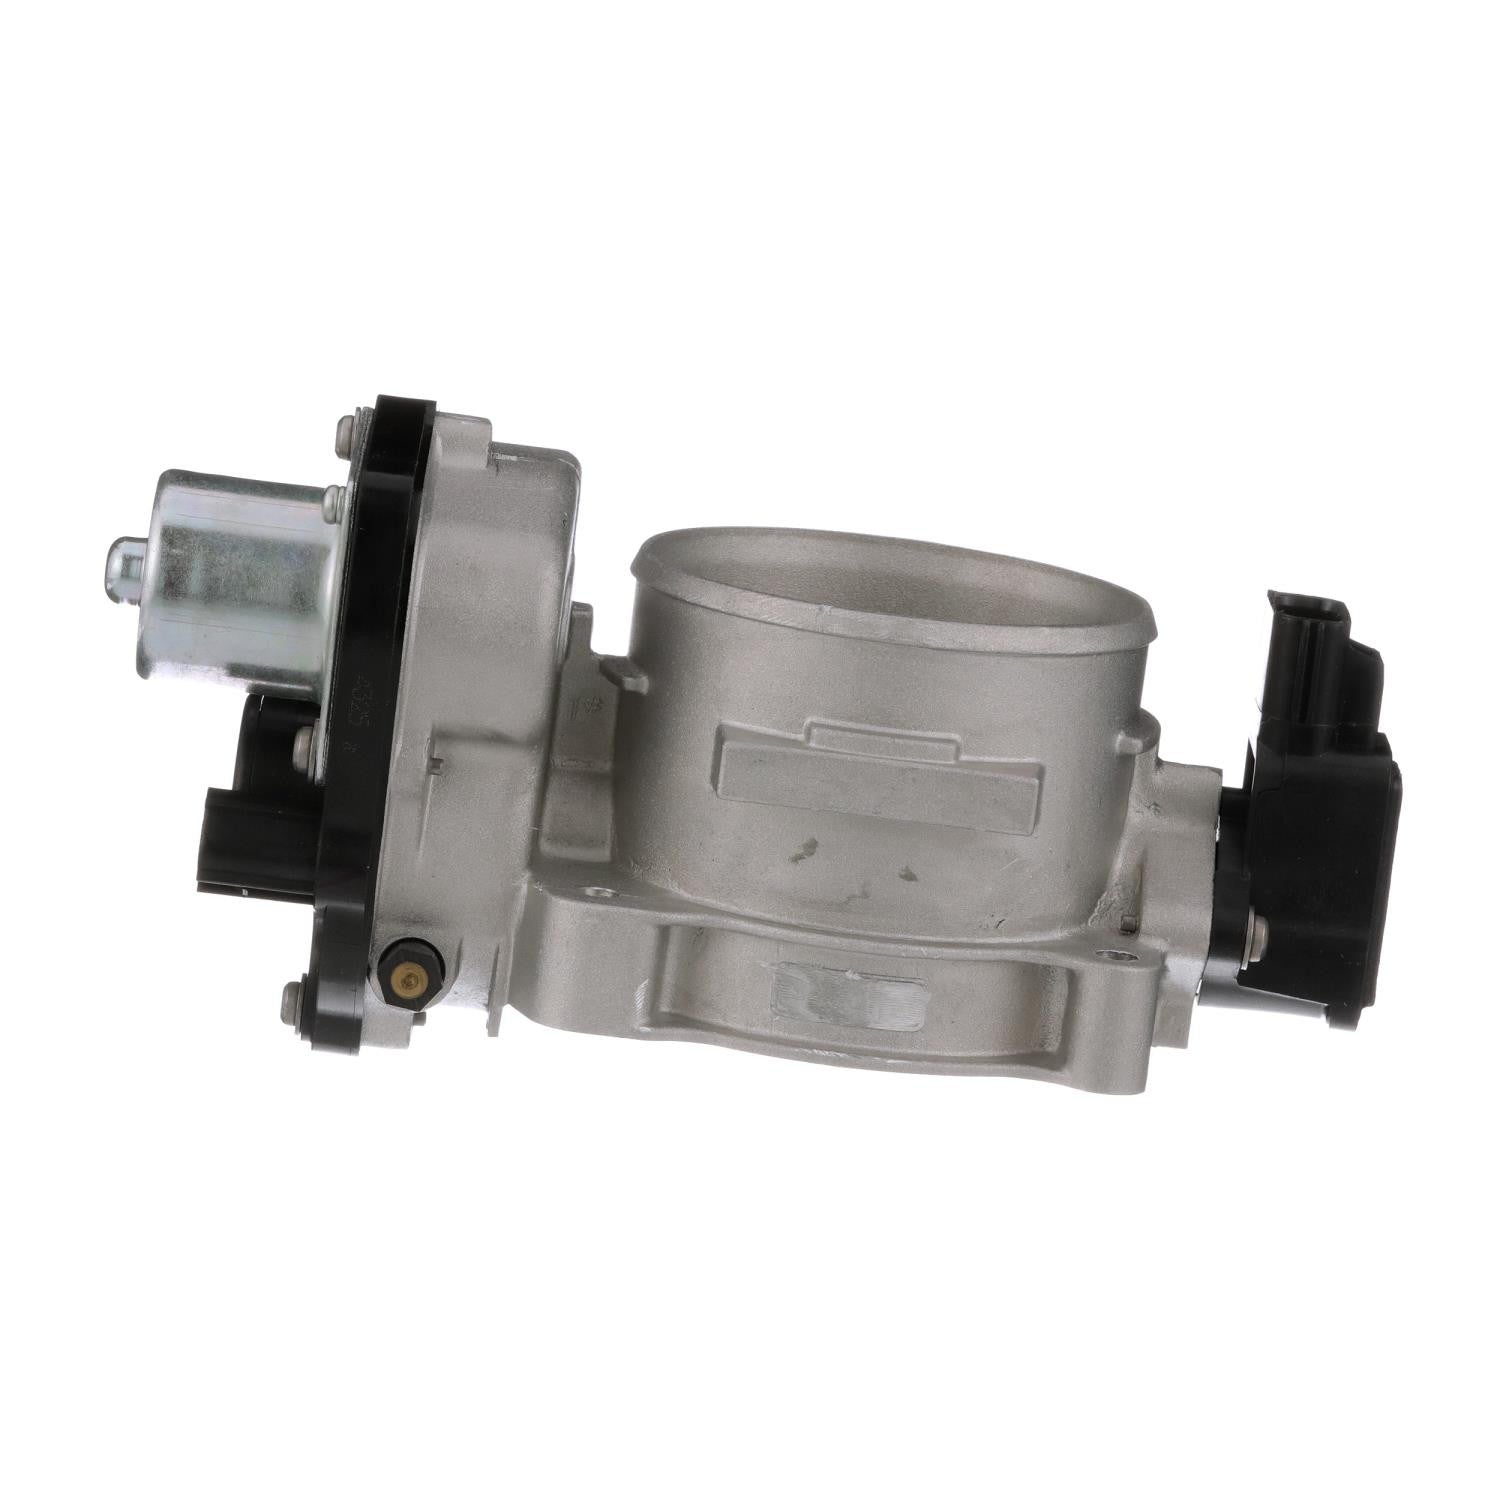 Left View of Fuel Injection Throttle Body STANDARD IGNITION S20022